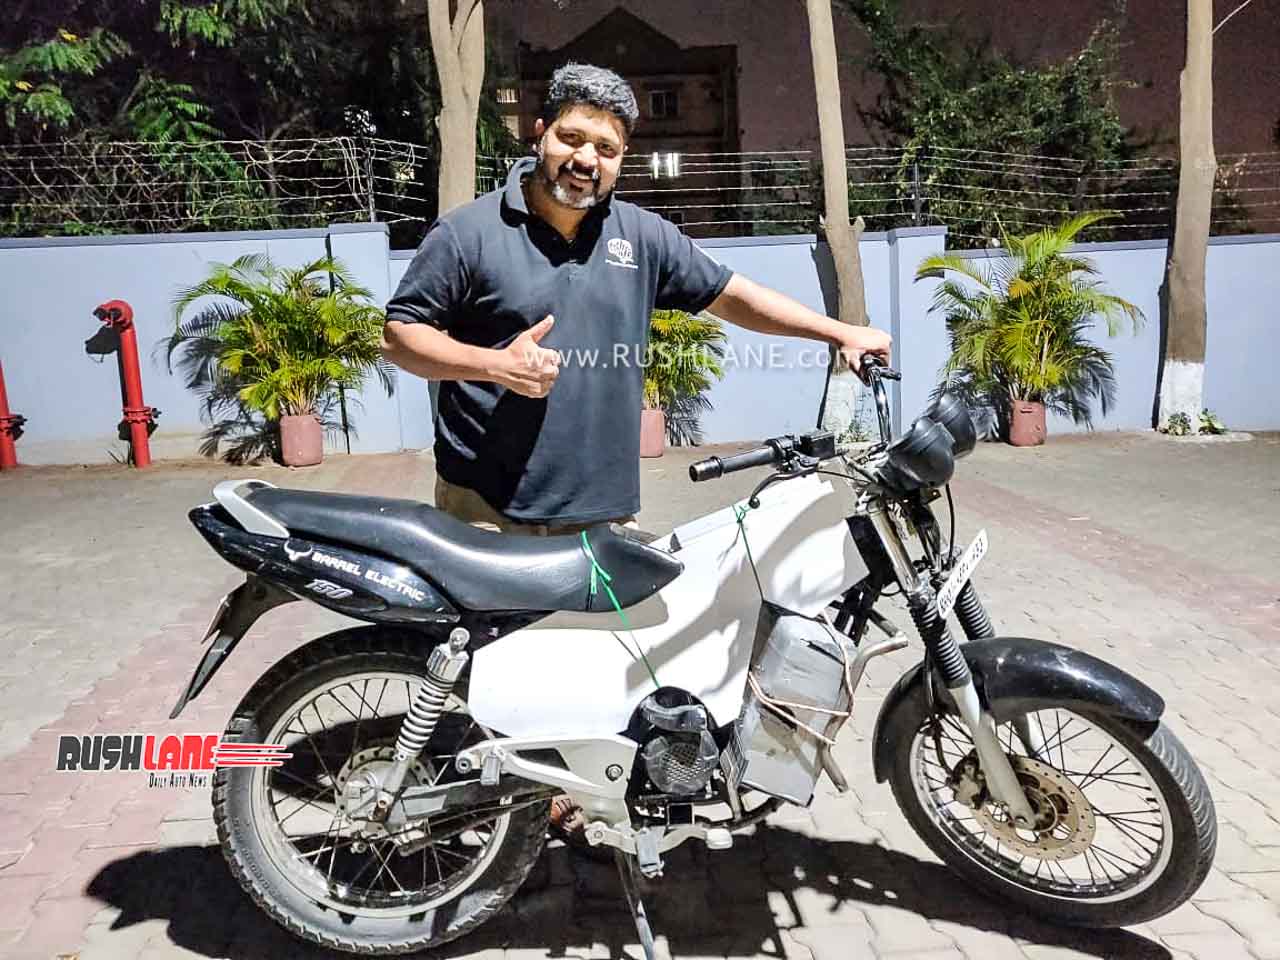 Bajaj Pulsar electric motorcycle project Made with Rs 1 lakh budget